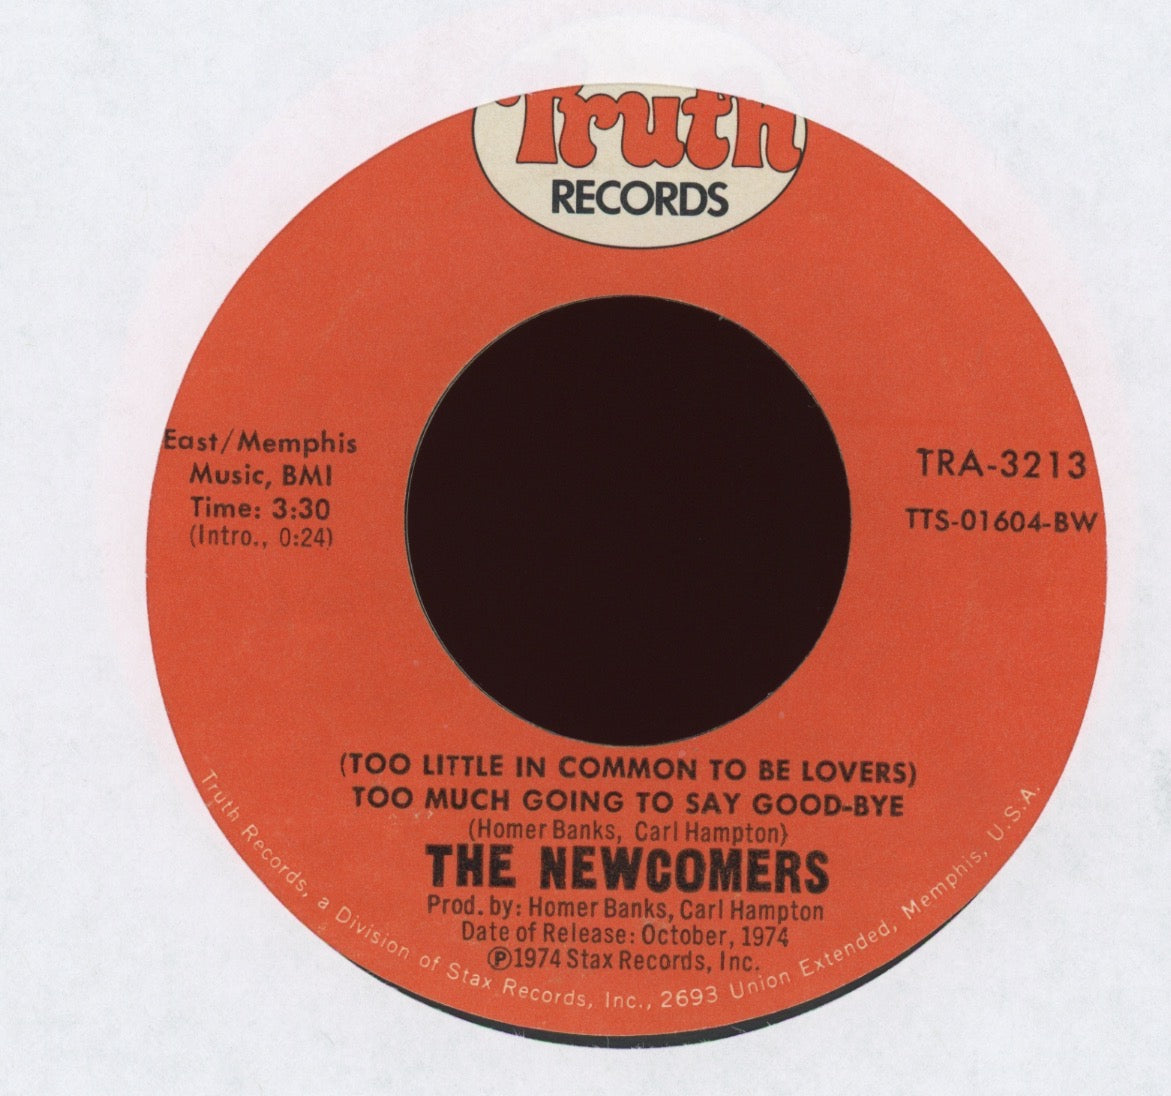 The Newcomers - The Whole World's A Picture Show on Truth 70's Soul 45